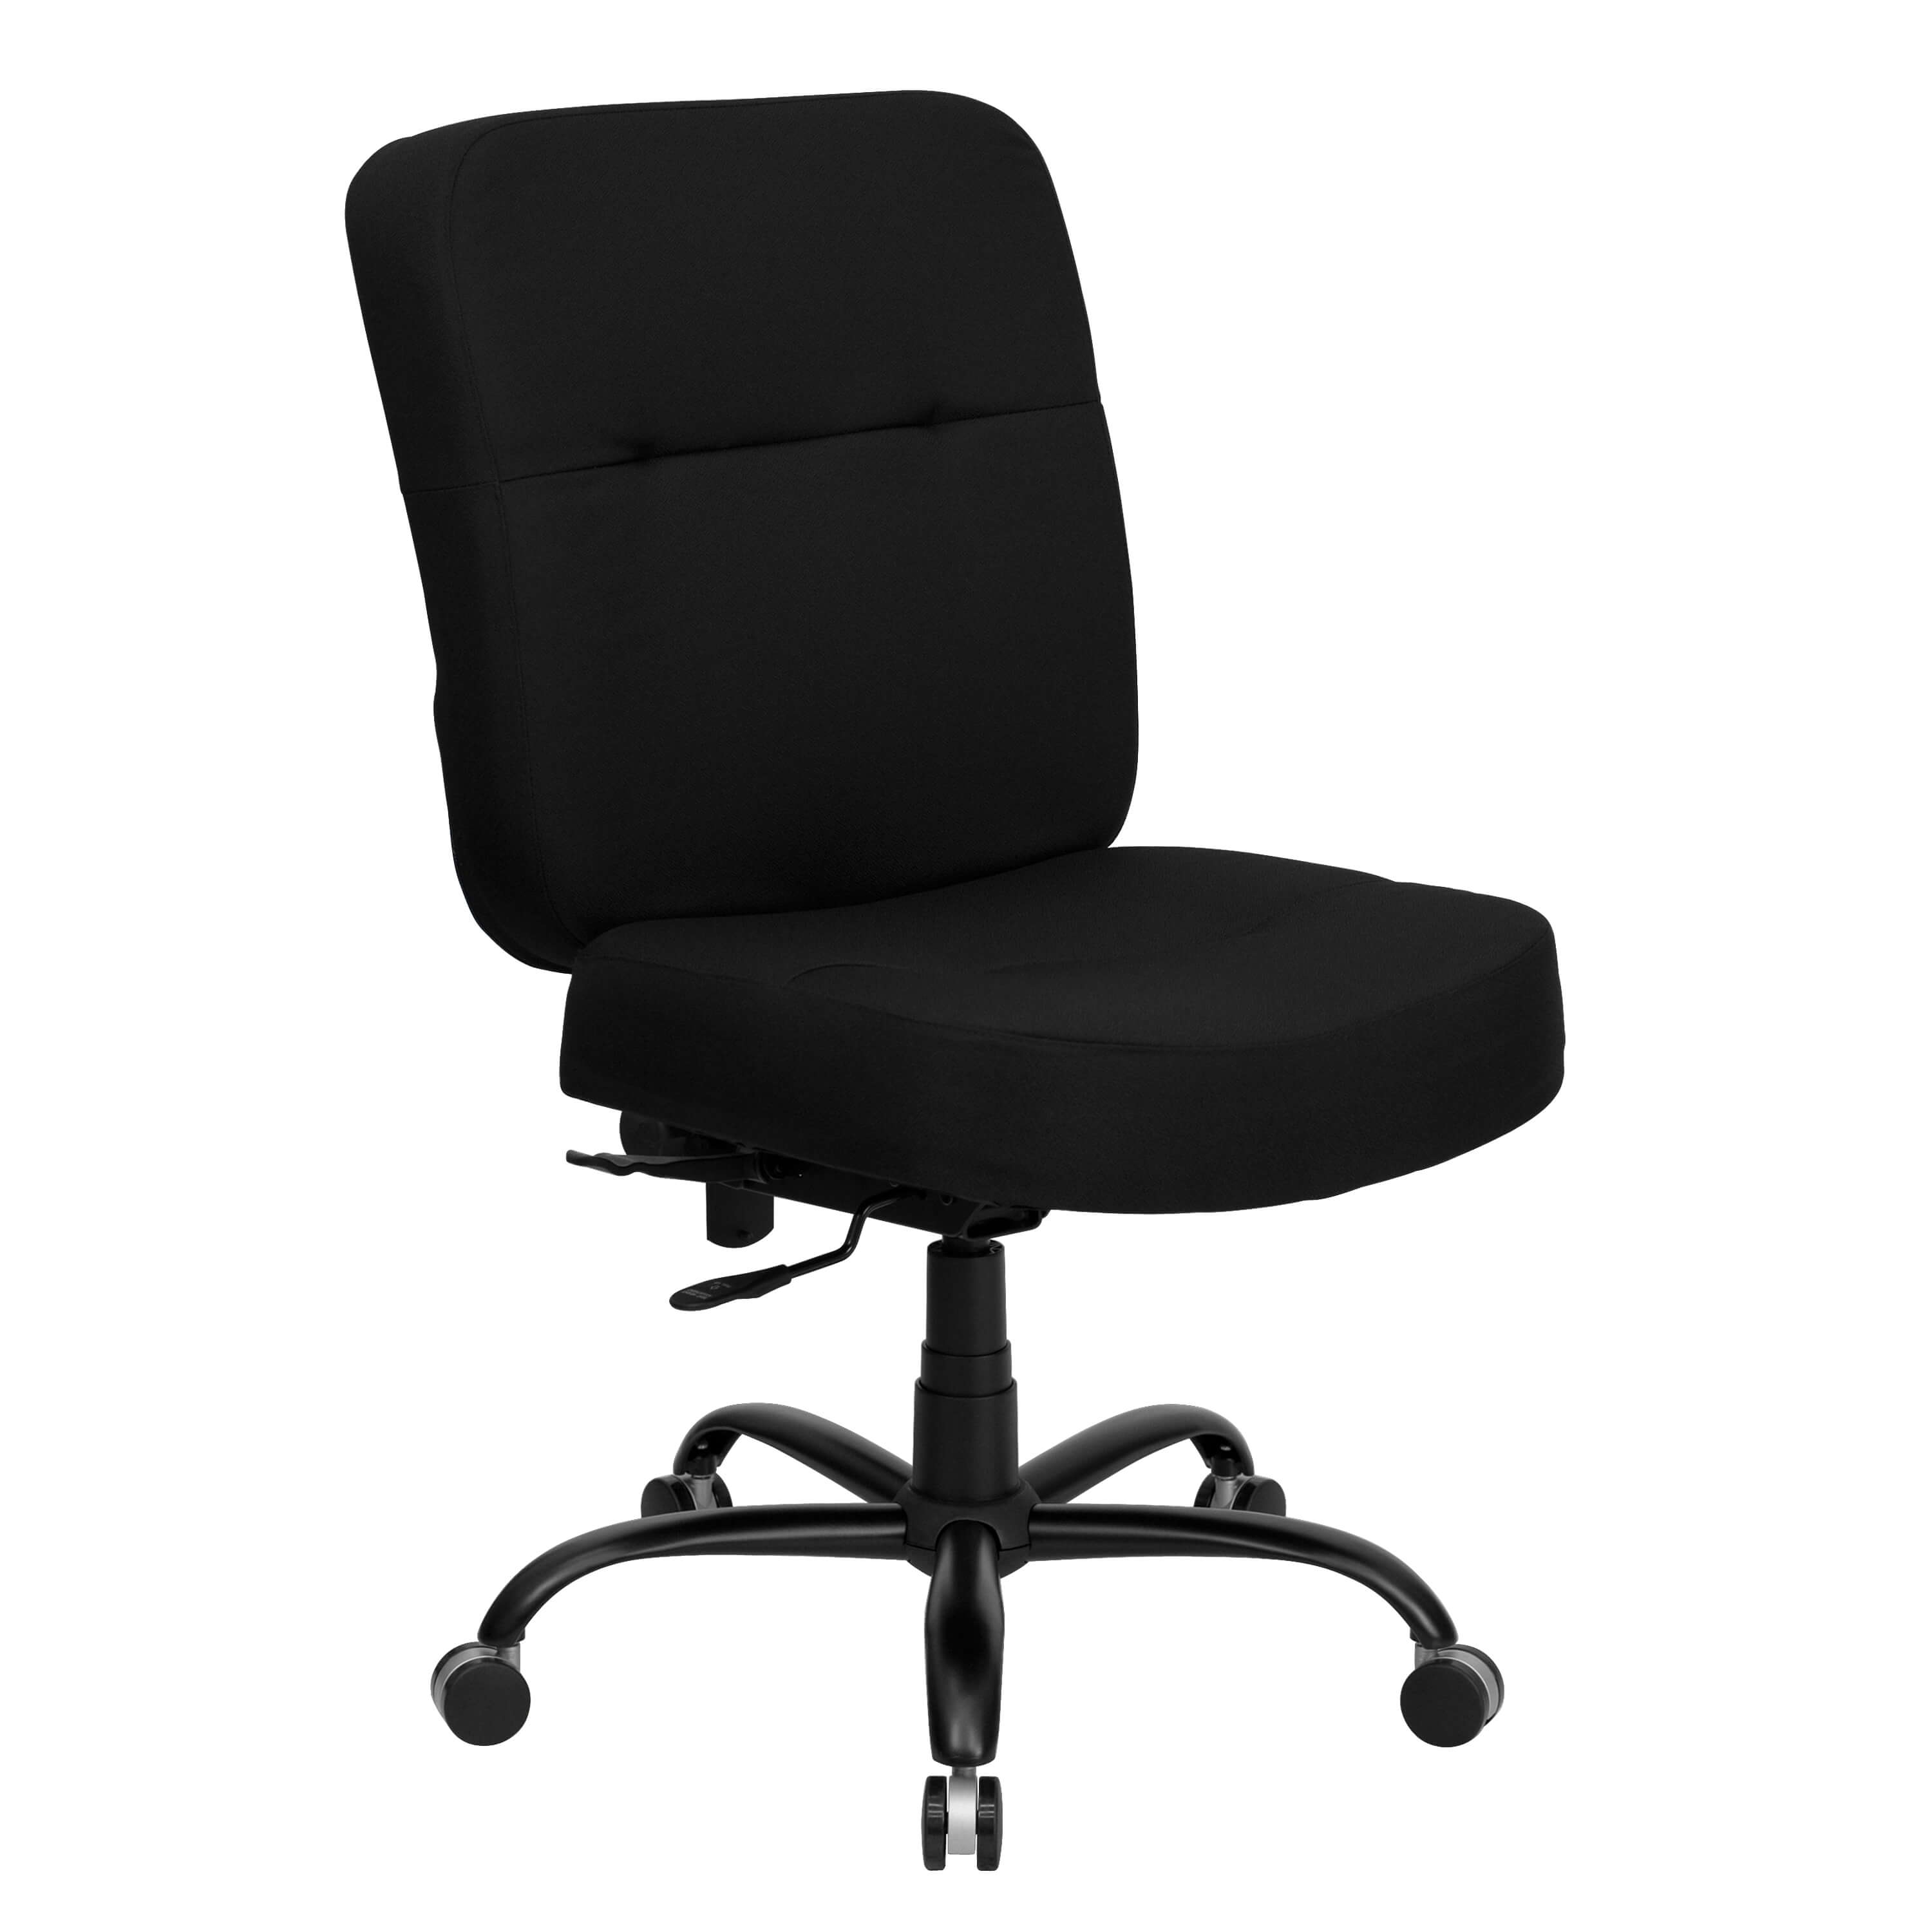 big-and-tall-office-chairs-high-weight-capacity-office-chair.jpg